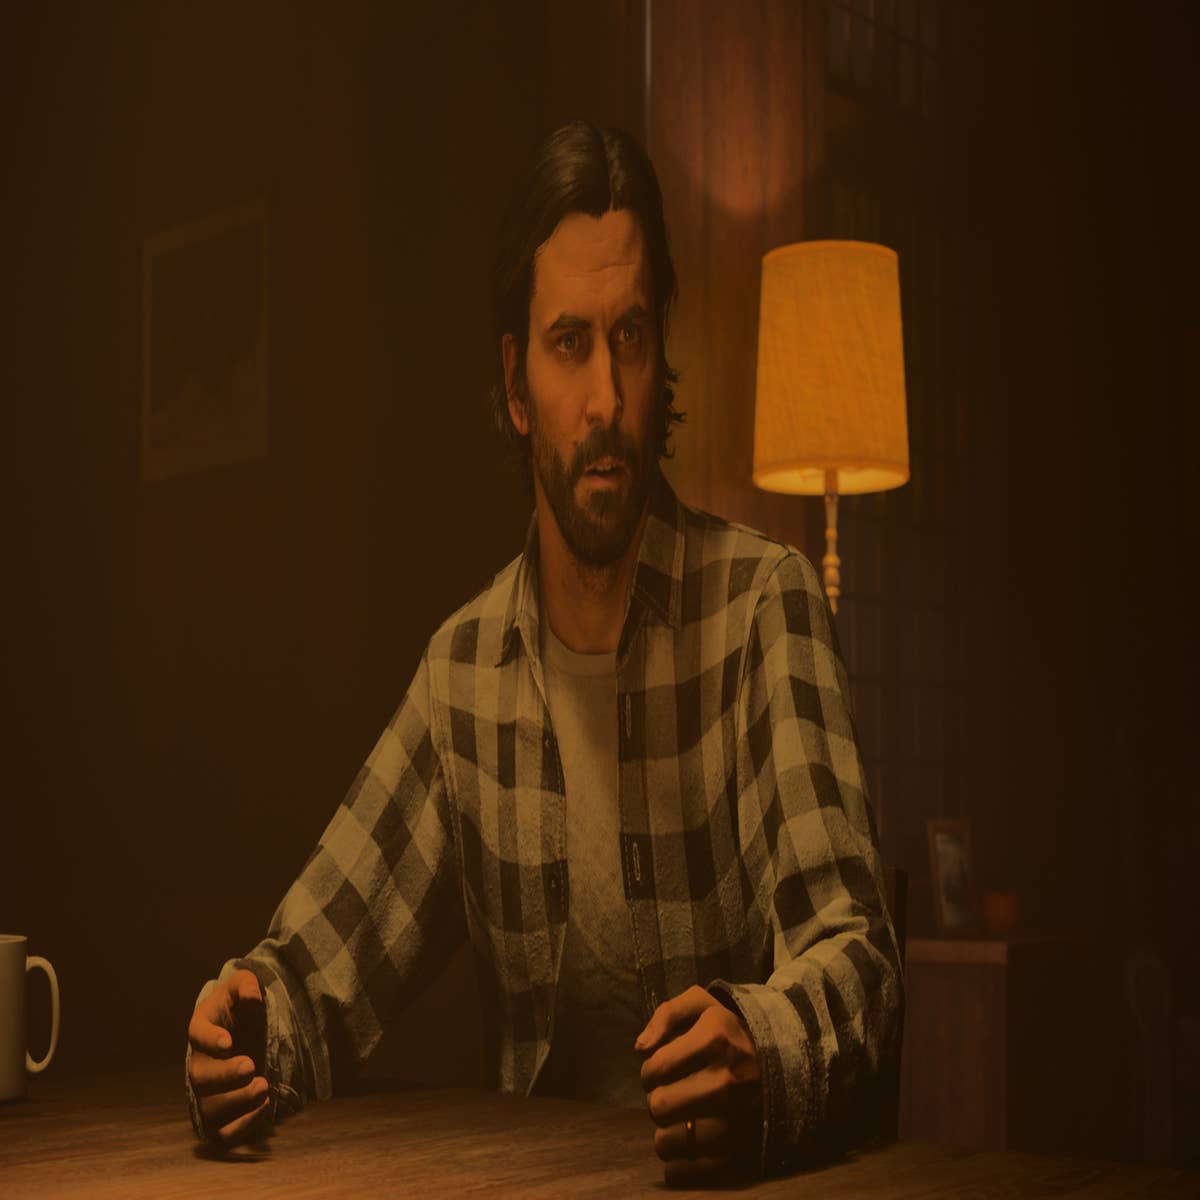 Alan Wake 2 System Requirements: Can I Run It? 